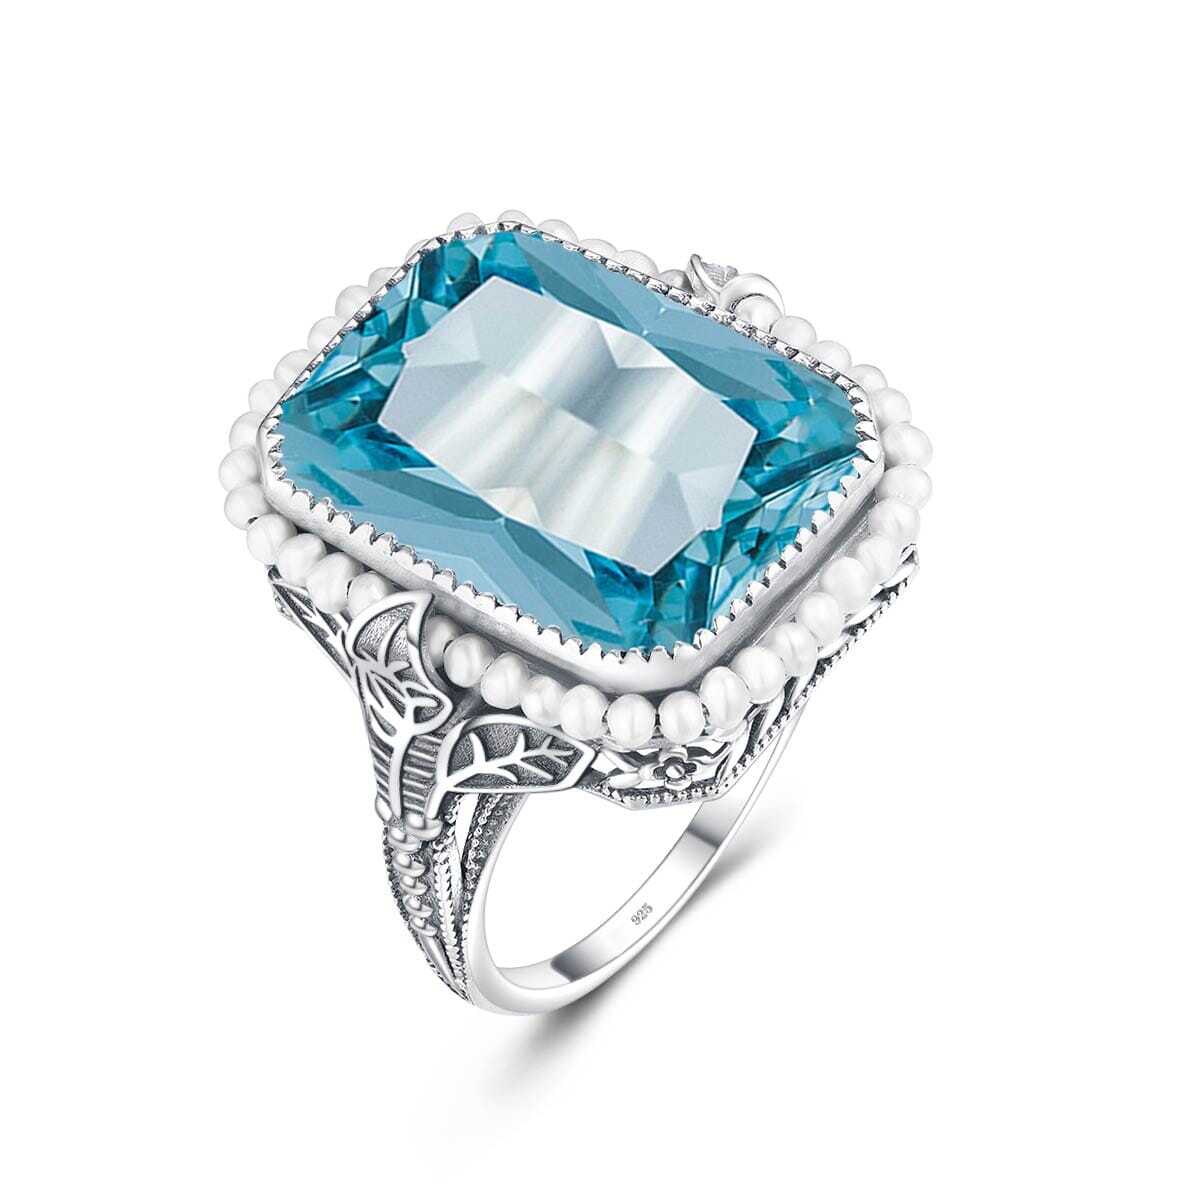 Aquamarine Ring With Natural Fresh Water Peals - 925 Sterling SilverRing7